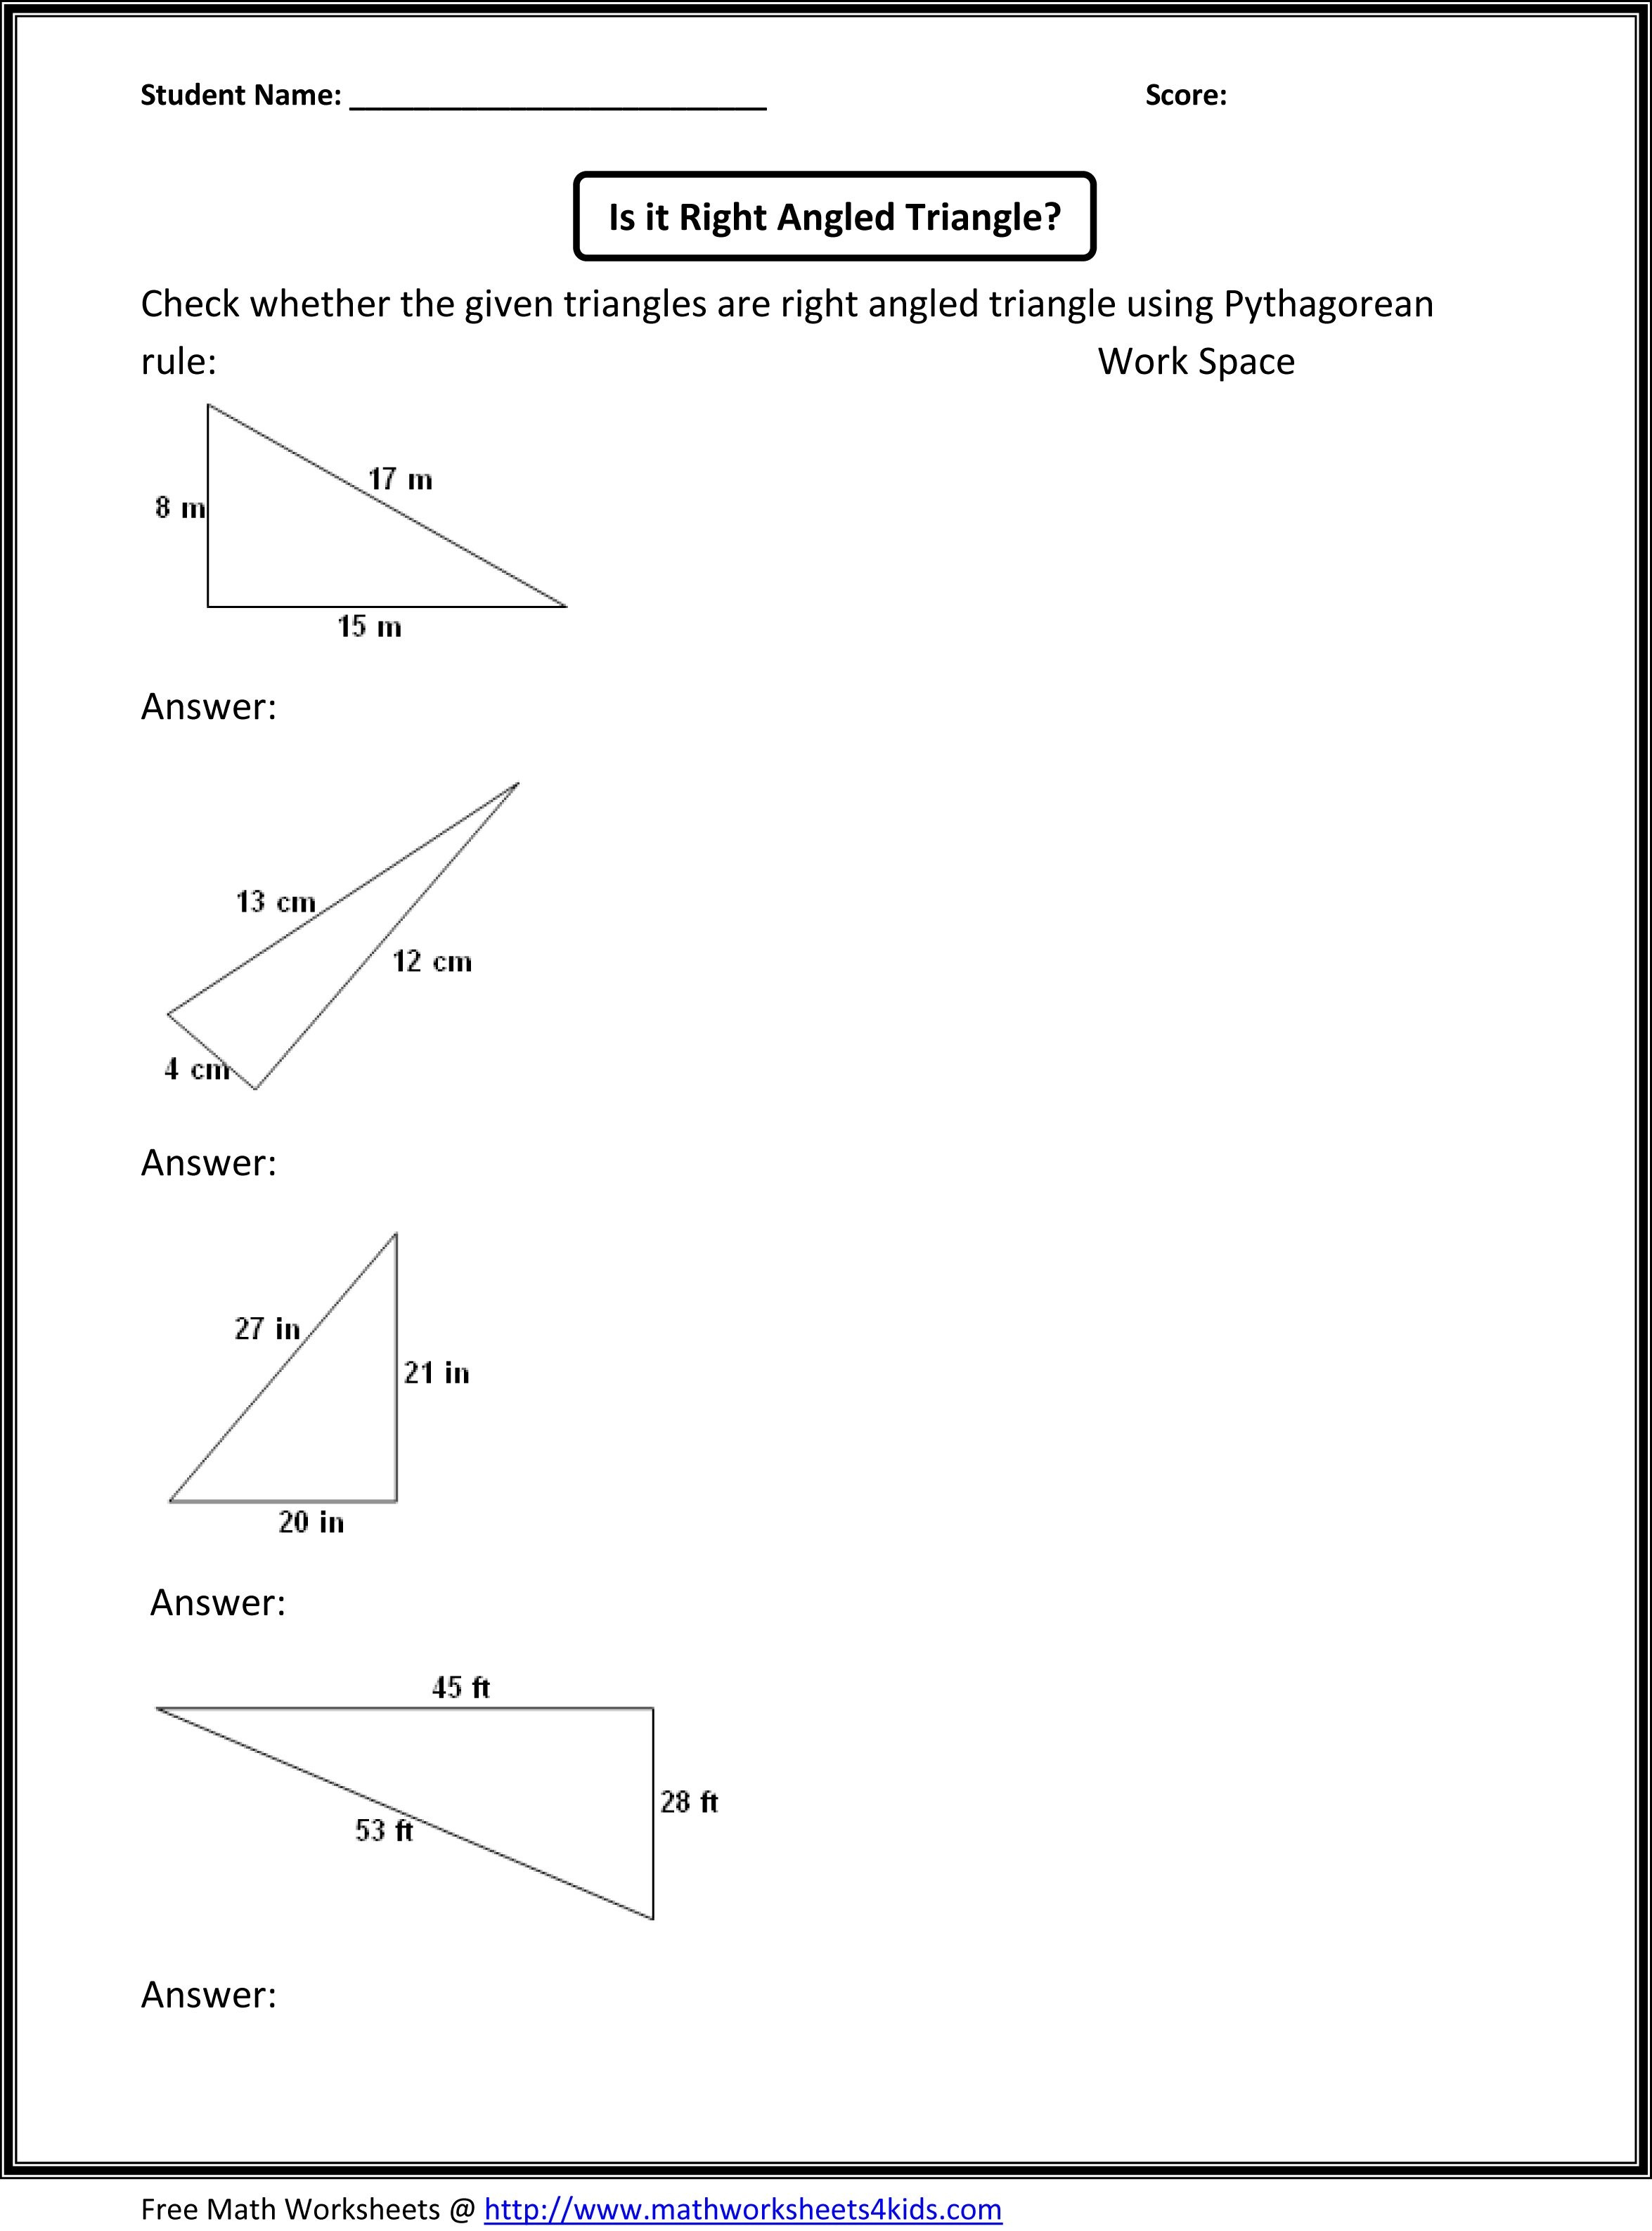 Pythagorean Theorem Worksheet With Answers